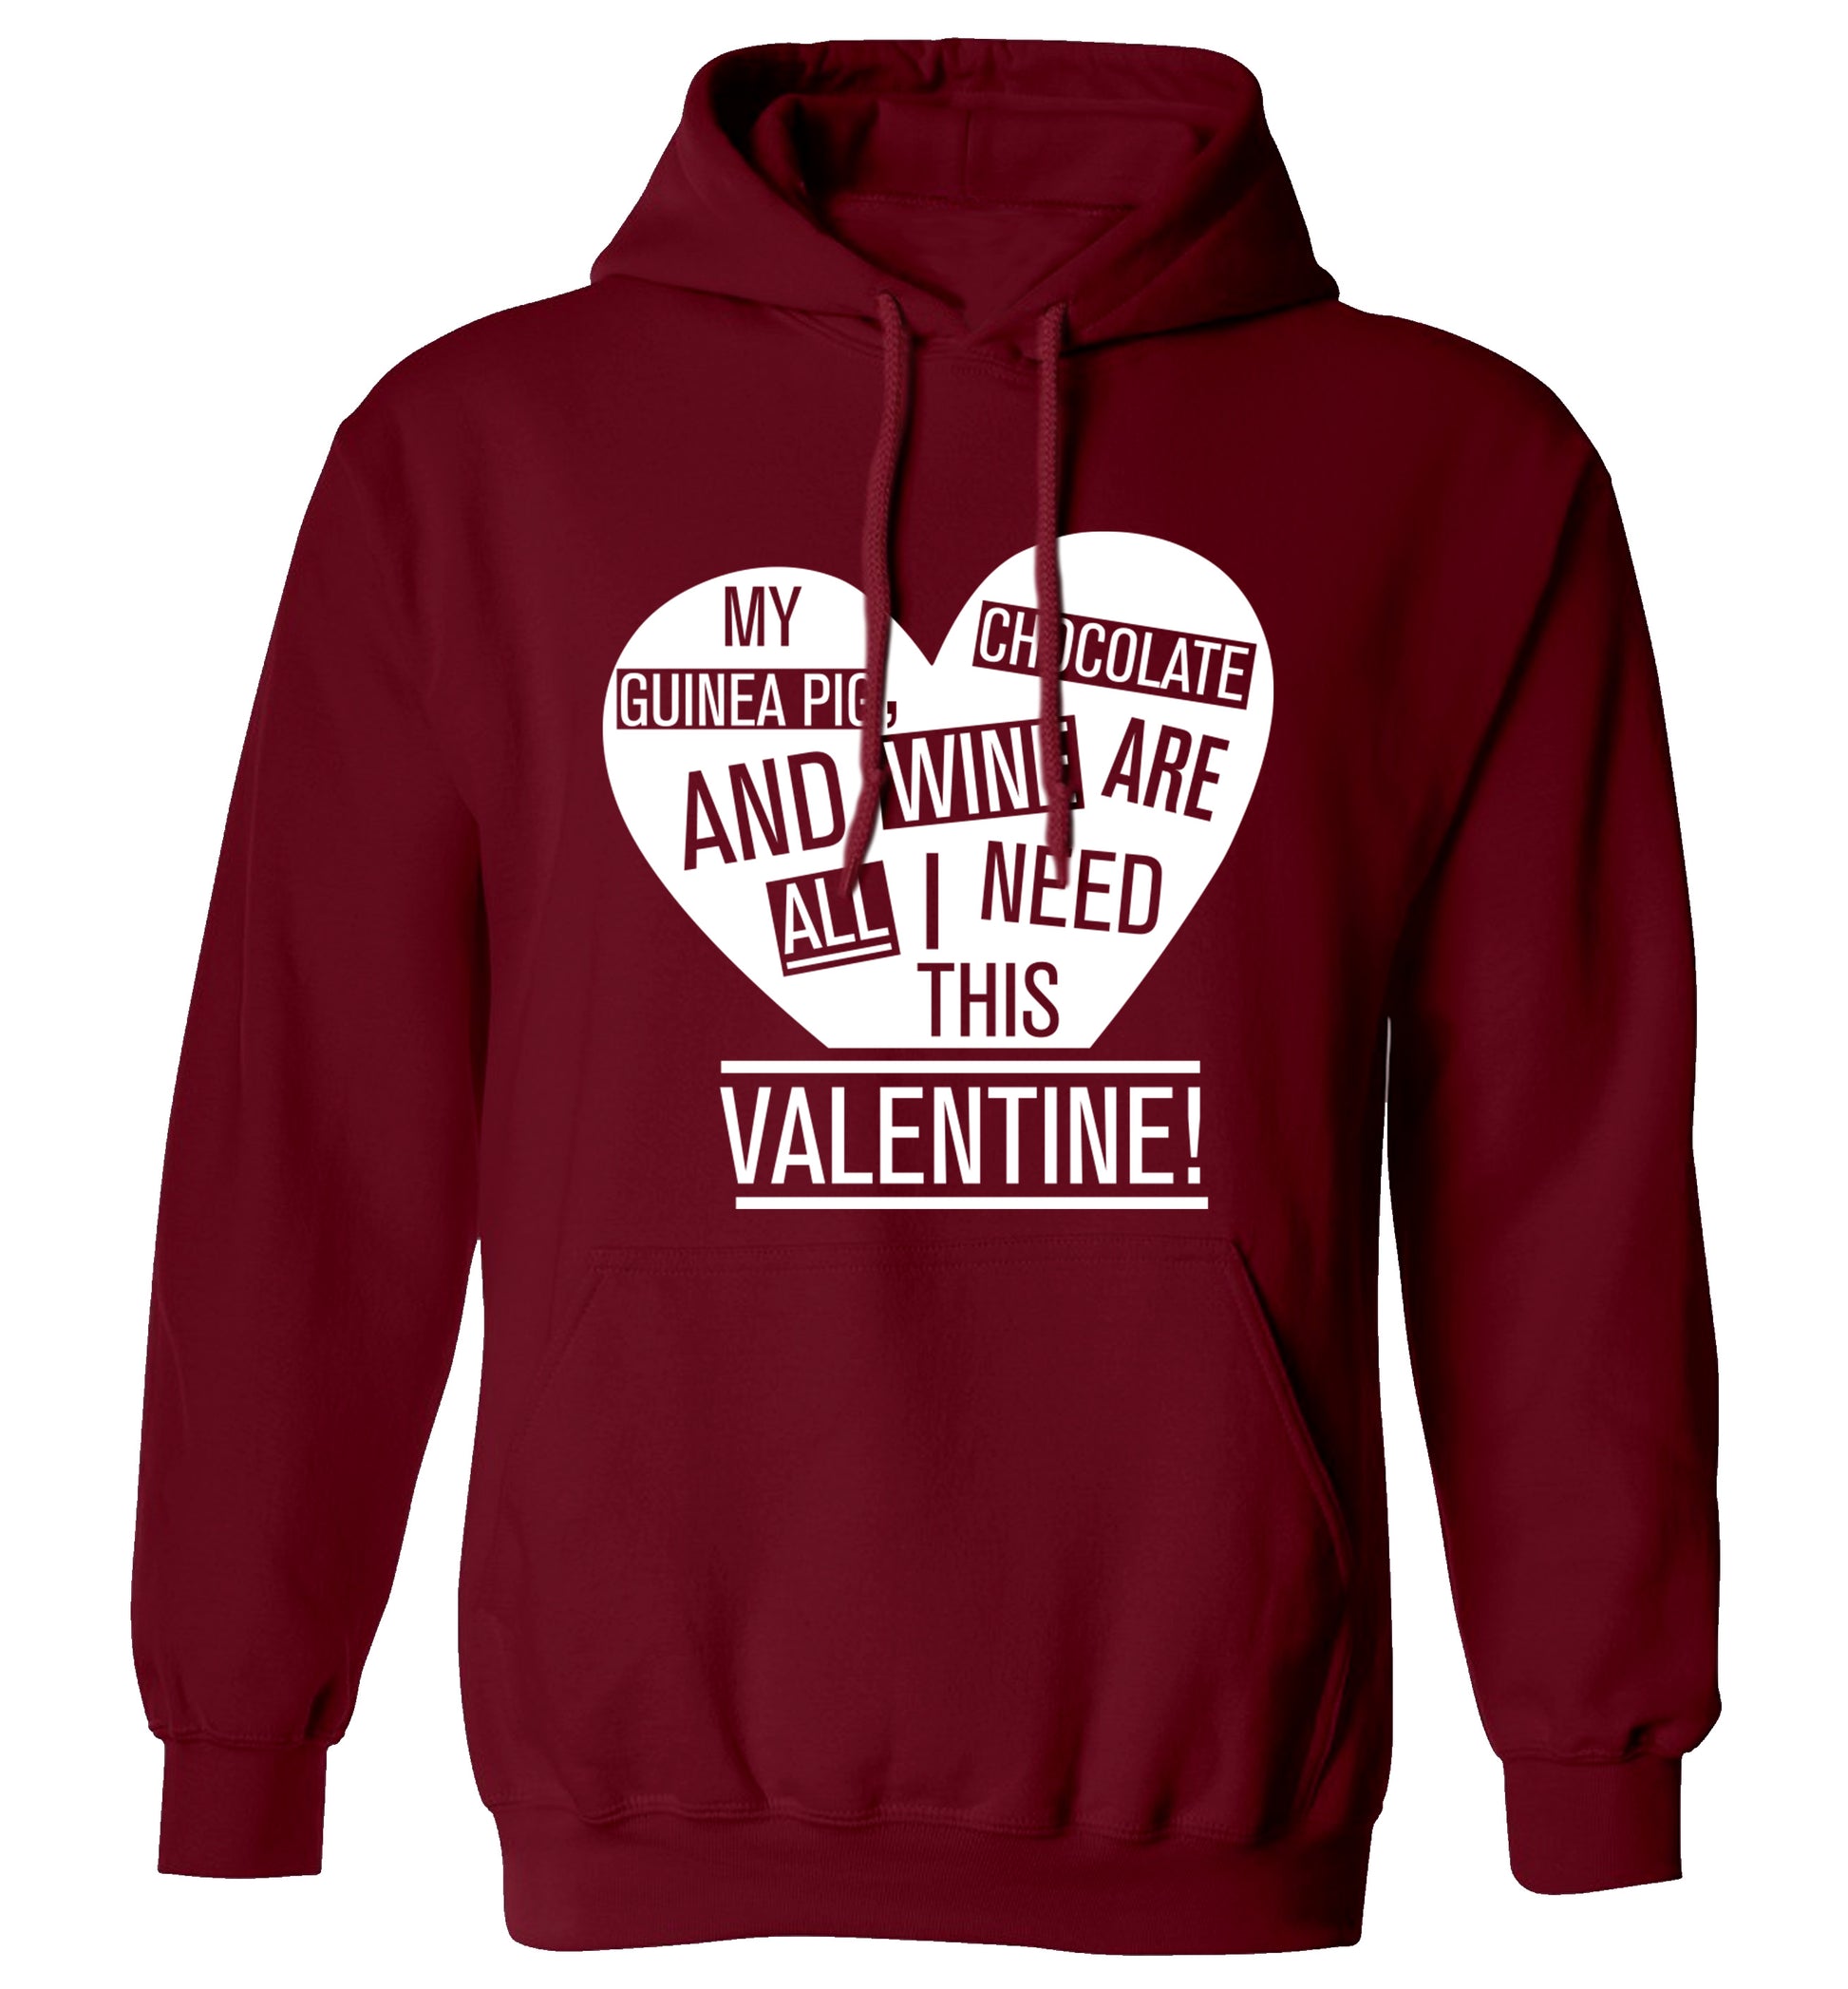 My guinea pig, chocolate and wine are all I need this valentine! adults unisex maroon hoodie 2XL